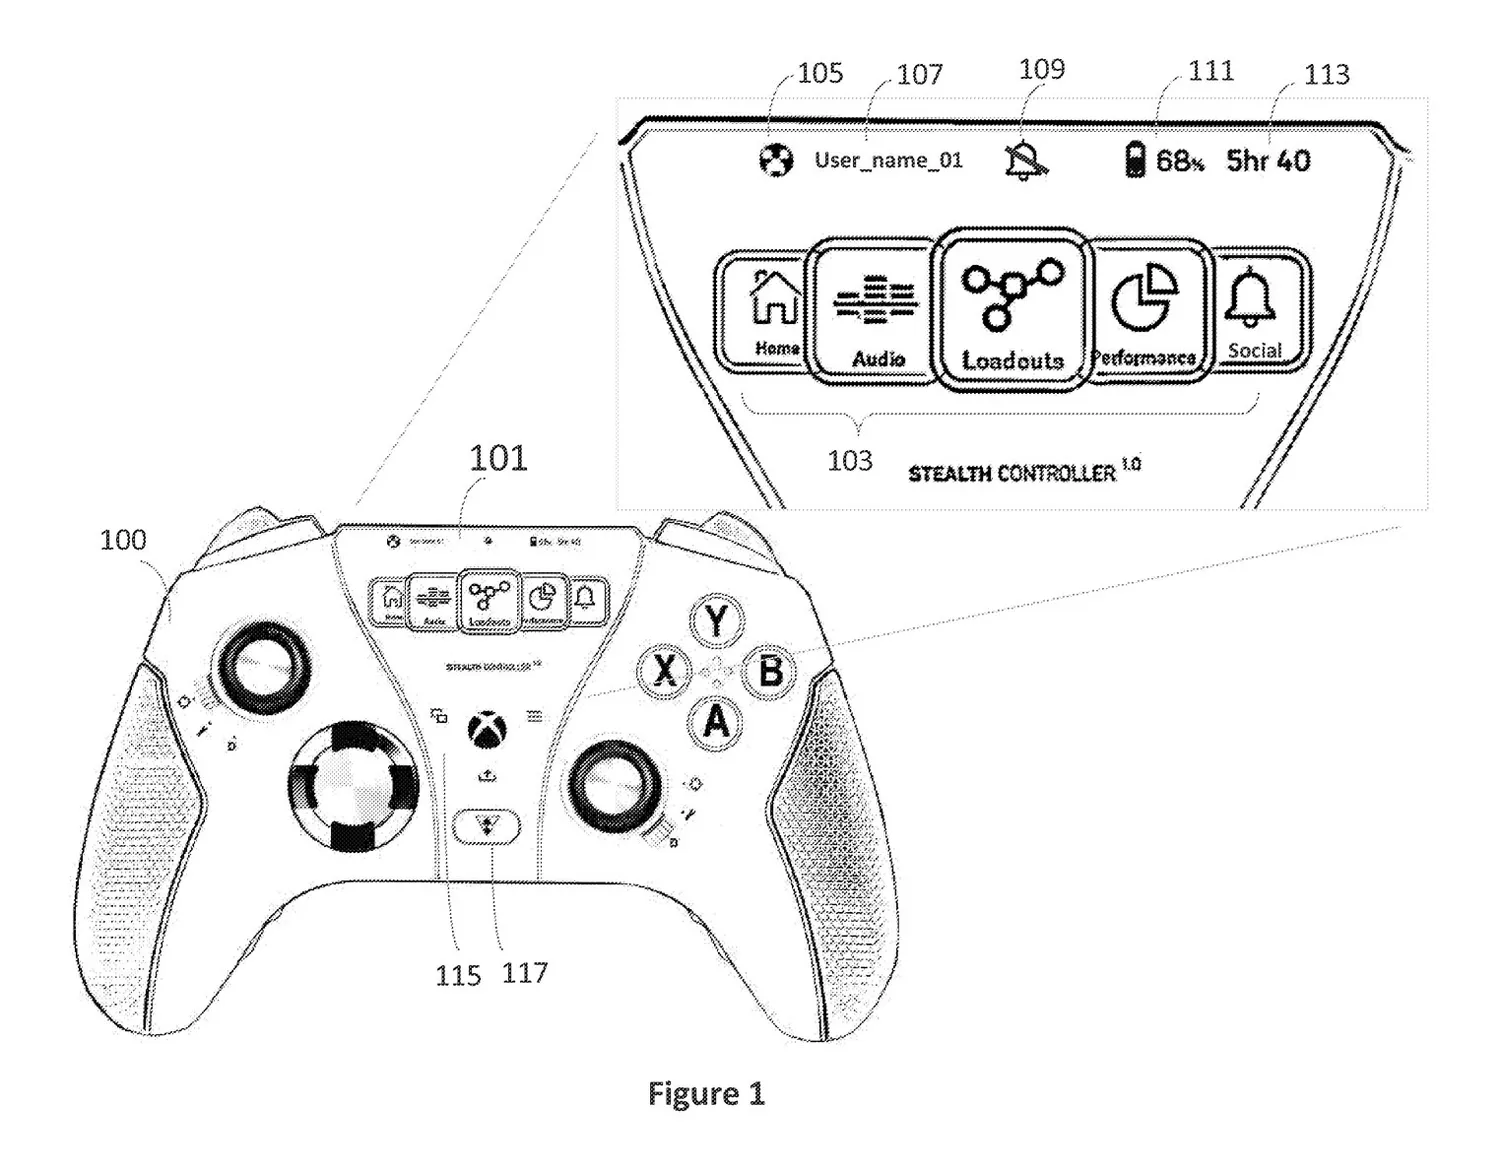 Xbox imagines a futuristic console with touch screen and social networking |  Xbox One